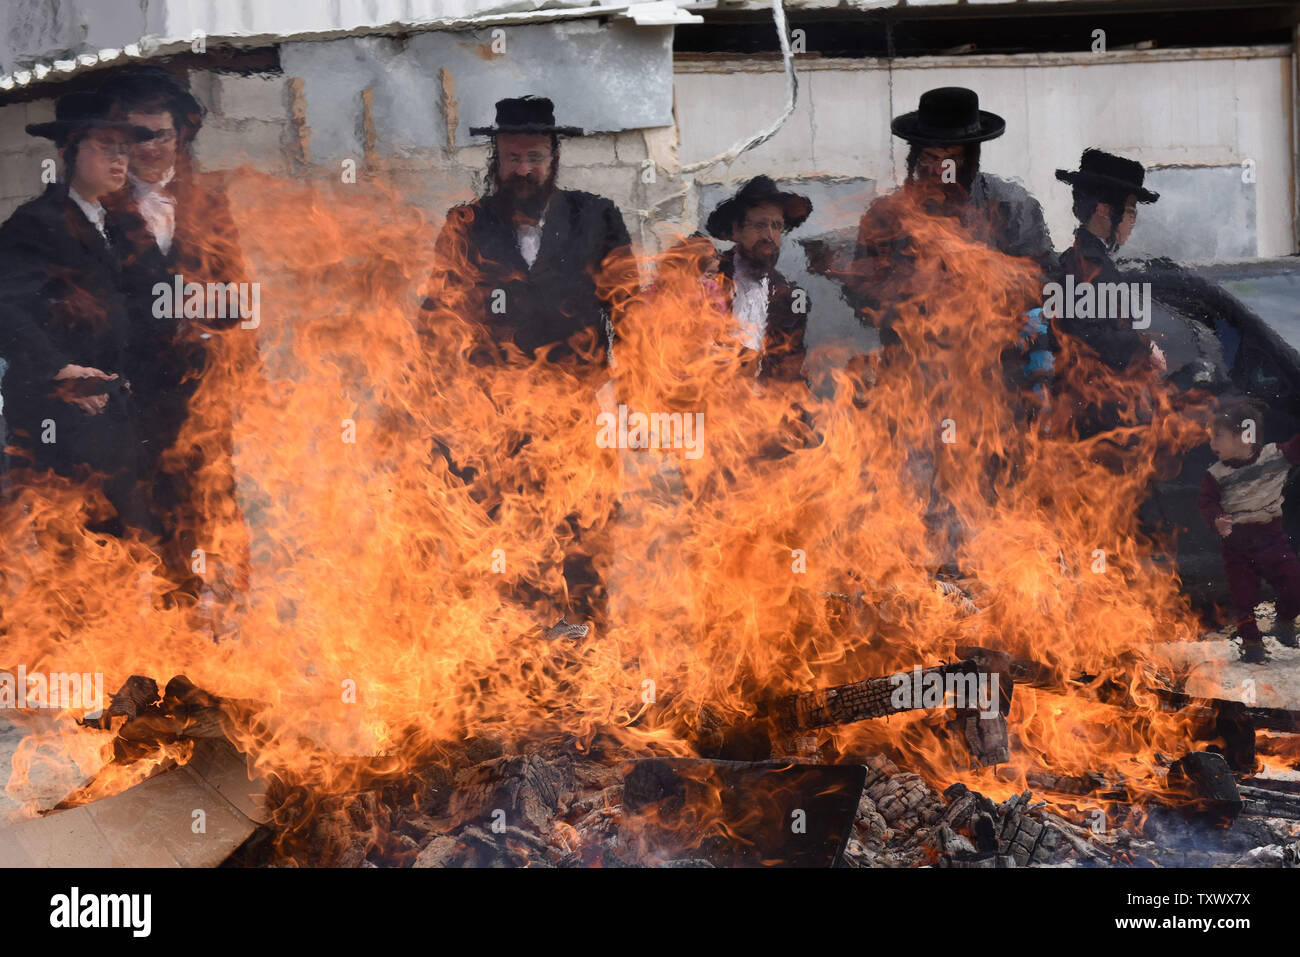 Ultra-Orthodox Jews burn leaven food products in preparation for the Jewish holiday of Passover in the Mea Shearim neighborhood in Jerusalem, Israel, April 10, 2017. Jews eat matzah, unleavened bread, during the eight days of Passover that celebrates the Biblical story of the exodus of the Israelites from slavery in Egypt.  Photo by Debbie Hill/UPI Stock Photo